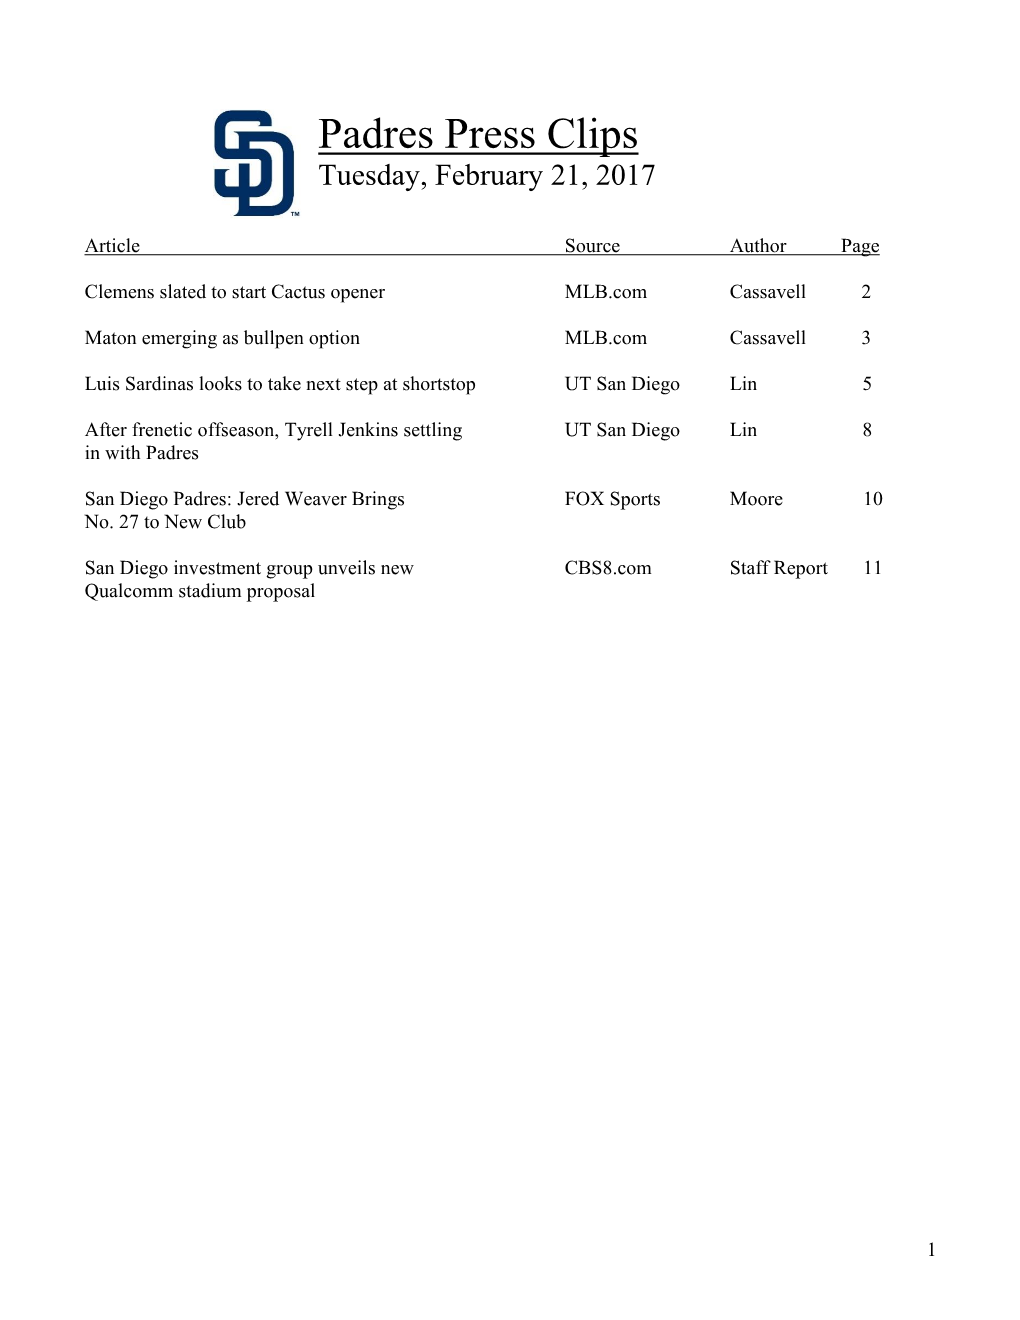 Padres Press Clips Tuesday, February 21, 2017